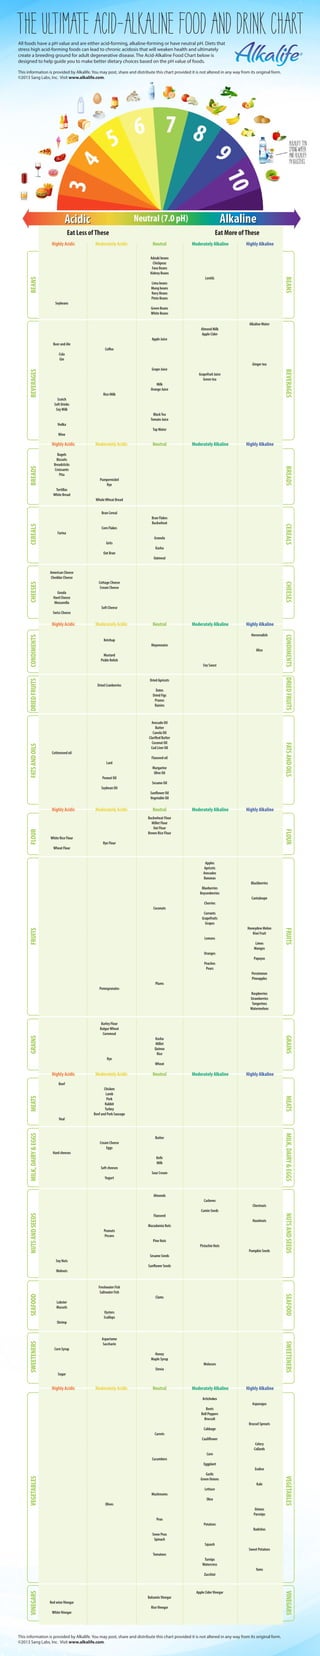 the ultimate acid-alkaline food and drink chart 
All foods have a pH value and are either acid-forming, alkaline-forming or have neutral pH. Diets that 
stress high acid-forming foods can lead to chronic acidosis that will weaken health and ultimately 
create a breeding ground for adult degenerative disease. The Acid-Alkaline Food Chart below is 
designed to help guide you to make better dietary choices based on the pH value of foods. 
This information is provided by Alkalife. You may post, share and distribute this chart provided it is not altered in any way from its original form. 
©2013 Sang Labs, Inc. Visit www.alkalife.com. 
Eat Less of These Eat More of These 
Highly Acidic Moderately Acidic Neutral Moderately Alkaline Highly Alkaline 
Adzuki beans 
Chickpeas 
Fava Beans 
Kidney Beans 
Lentils 
Lima beans 
Mung beans 
Navy Beans 
Pinto Beans 
Soybeans 
Green Beans 
White Beans 
Alkaline Water 
Almond Milk 
Apple Cider 
Apple Juice 
Beer and Ale 
Coffee 
Cola 
Gin 
Ginger tea 
Grape Juice 
Grapefruit Juice 
Green tea 
Milk 
Orange Juice 
Rice Milk 
Scotch 
Soft Drinks 
Soy Milk 
Black Tea 
Tomato Juice 
Vodka 
Tap Water 
Wine 
Bagels 
Biscuits 
Breadsticks 
Croissants 
Pita 
Pumpernickel 
Rye 
Tortillas 
White Bread 
Whole Wheat Bread 
Bran Cereal 
Bran Flakes 
Buckwheat 
Corn Flakes 
Farina 
Granola 
Grits 
Kasha 
Oat Bran 
Oatmeal 
American Cheese 
Cheddar Cheese 
Cottage Cheese 
Cream Cheese 
Gouda 
Hard Cheese 
Mozzarella 
Soft Cheese 
Swiss Cheese 
Horseradish 
Ketchup 
Mayonnaise 
Miso 
Mustard 
Pickle Relish 
Soy Sauce 
Dried Apricots 
Dried Cranberries 
Dates 
Dried Figs 
Prunes 
Raisins 
Avocado Oil 
Butter 
Canola Oil 
Clarified Butter 
Coconut Oil 
Cod Liver Oil 
Cottonseed oil 
Flaxseed oil 
Lard 
Margarine 
Olive Oil 
Peanut Oil 
Sesame Oil 
Soybean Oil 
Sunflower Oil 
Vegetable Oil 
Buckwheat Flour 
Millet Flour 
Oat Flour 
Brown Rice Flour 
White Rice Flour 
Rye Flour 
Wheat Flour 
Apples 
Apricots 
Avocados 
Bananas 
Blackberries 
Blueberries 
Boysenberries 
Cantaloupe 
Cherries 
Coconuts 
Currants 
Grapefruits 
Grapes 
Honeydew Melon 
Kiwi Fruit 
Lemons 
Limes 
Mangos 
Oranges 
Papayas 
Peaches 
Pears 
Persimmon 
Pineapples 
Plums 
Pomegranates 
Raspberries 
Strawberries 
Tangerines 
Watermelons 
Barley Flour 
Bulgur Wheat 
Cornmeal 
Kasha 
Millet 
Quinoa 
Rice 
Rye 
Wheat 
Beef 
Chicken 
Lamb 
Pork 
Rabbit 
Turkey 
Beef and Pork Sausage 
Veal 
Butter 
Cream Cheese 
Eggs 
Hard cheeses 
Kefir 
Milk 
Soft cheeses 
Sour Cream 
Yogurt 
Almonds 
Cashews 
Chestnuts 
Cumin Seeds 
Flaxseed 
Hazelnuts 
Macadamia Nuts 
Peanuts 
Pecans 
Pine Nuts 
Pistachio Nuts 
Pumpkin Seeds 
Sesame Seeds 
Soy Nuts 
Sunflower Seeds 
Walnuts 
Freshwater Fish 
Saltwater Fish 
Clams 
Lobster 
Mussels 
Oysters 
Scallops 
Shrimp 
Aspartame 
Saccharin 
Corn Syrup 
Honey 
Maple Syrup 
Molasses 
Stevia 
Sugar 
Artichokes 
Asparagus 
Beets 
Bell Peppers 
Broccoli 
Brussel Sprouts 
Cabbage 
Carrots 
Cauliflower 
Celery 
Collards 
Corn 
Cucumbers 
Eggplant 
Endive 
Garlic 
Green Onions 
Kale 
Lettuce 
Mushrooms 
Okra 
Olives 
Onions 
Parsnips 
Peas 
Potatoes 
Radishes 
Snow Peas 
Spinach 
Squash 
Sweet Potatoes 
Tomatoes 
Turnips 
Watercress 
Yams 
Zucchini 
Apple Cider Vinegar 
Balsamic Vinegar 
Red wine Vinegar 
Rice Vinegar 
White Vinegar 
VINEGARS VEGETABLES SWEETENERS SEAFOOD NUTS AND SEEDS MILK, DAIRY & EGGS MEATS GRAINS FRUITS FLOUR FATS AND OILS DRIED FRUITS CONDIMENTS CHEESES CEREALS BREADS BEVERAGES BEANS 
BEANS BEVERAGES BREADS CEREALS CHEESES CONDIMENTS DRIED FRUITS FATS AND OILS FLOUR FRUITS GRAINS MEATS MILK, DAIRY & EGGS NUTS AND SEEDS SEAFOOD SWEETENERS VEGETABLES VINEGARS 
Highly Acidic Moderately Acidic Neutral Moderately Alkaline Highly Alkaline 
Highly Acidic Moderately Acidic Neutral Moderately Alkaline Highly Alkaline 
Highly Acidic Moderately Acidic Neutral Moderately Alkaline Highly Alkaline 
Highly Acidic Moderately Acidic Neutral Moderately Alkaline Highly Alkaline 
Highly Acidic Moderately Acidic Neutral Moderately Alkaline Highly Alkaline 
This information is provided by Alkalife. You may post, share and distribute this chart provided it is not altered in any way from its original form. 
©2013 Sang Labs, Inc. Visit www.alkalife.com. 
